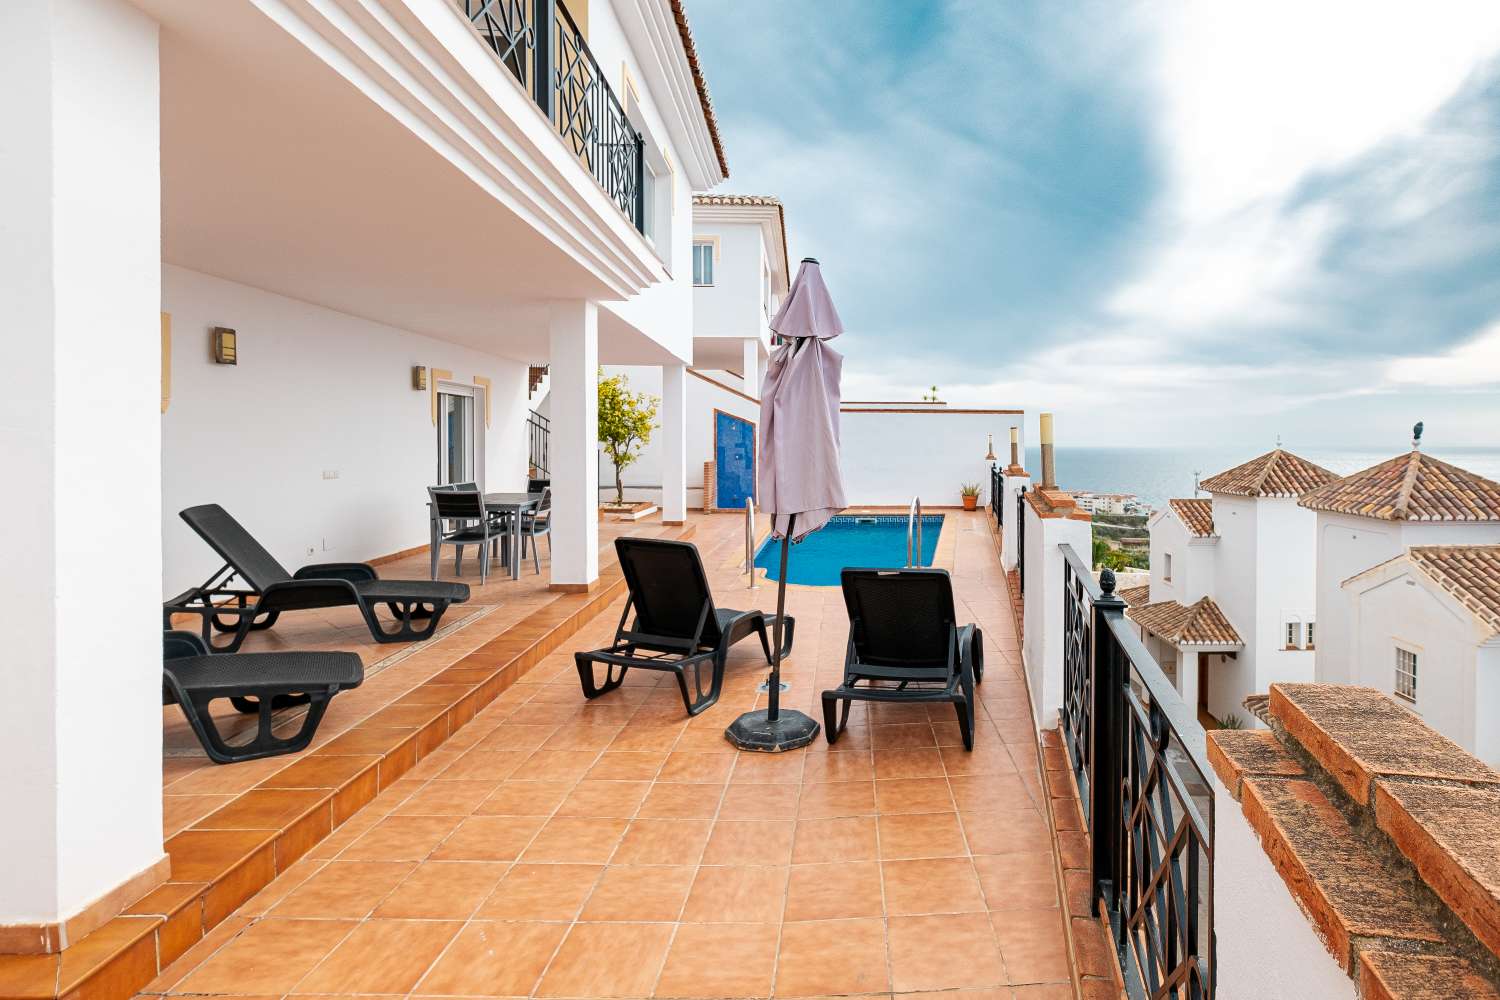 Beautiful independent villa in Torrox Park in perfect condition and with stunning sea views